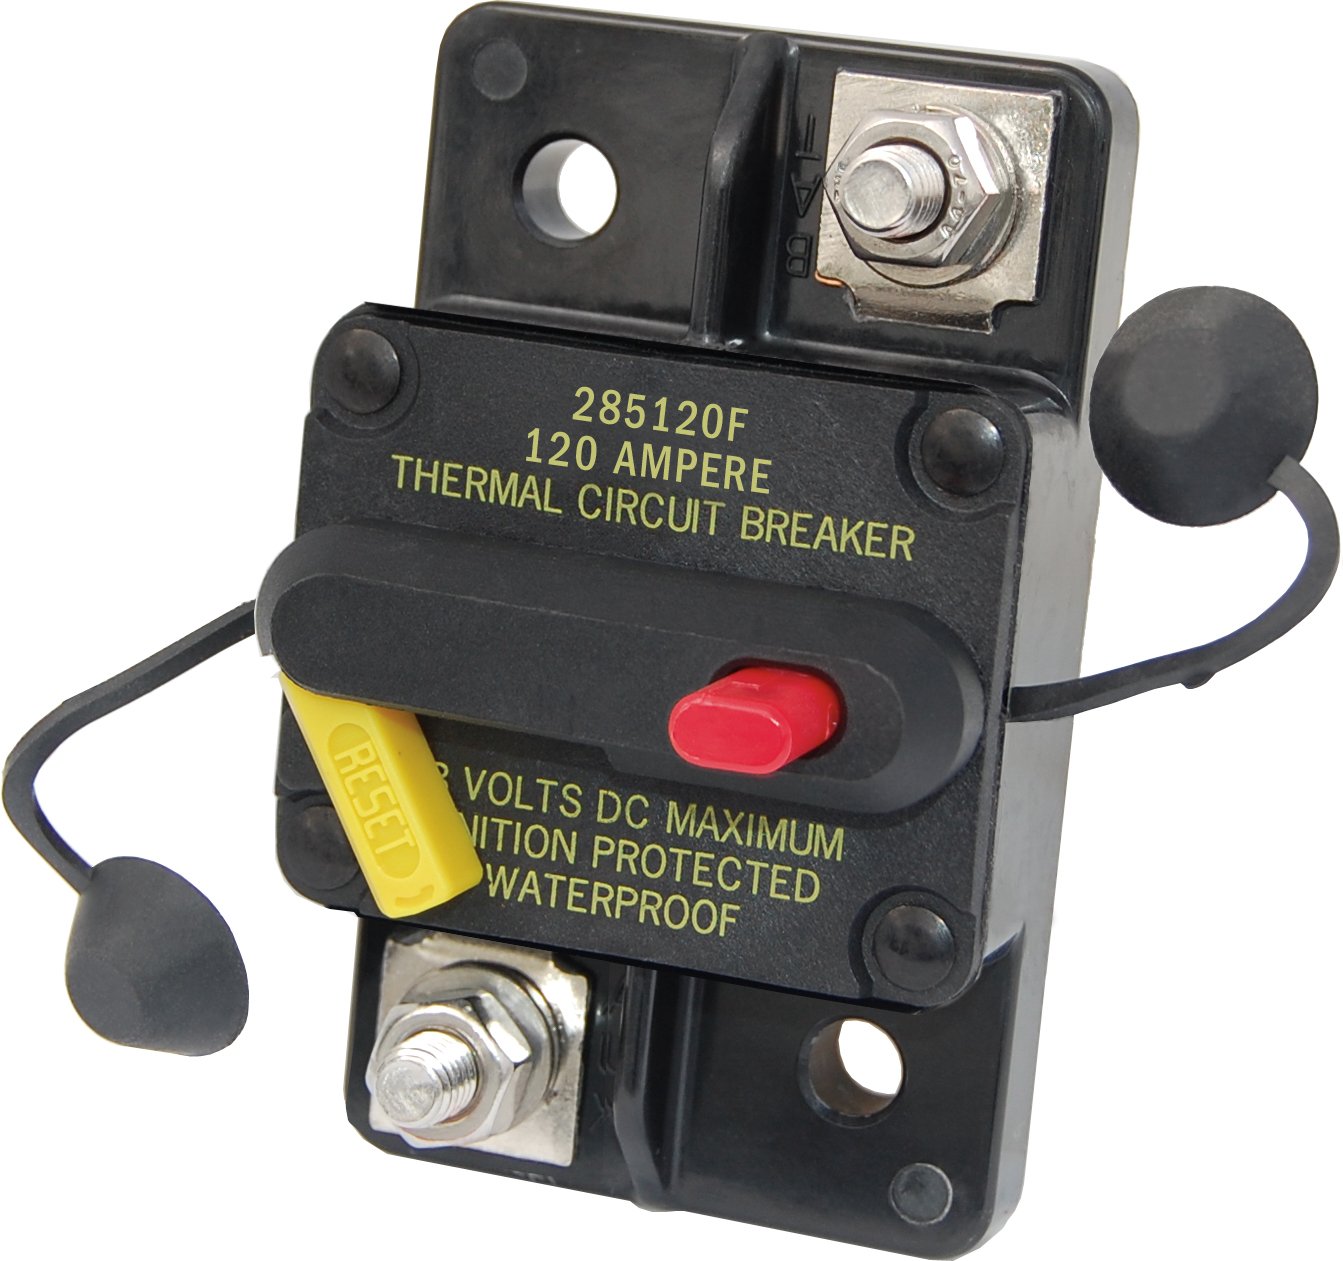 Is the Blue Sea 7188 285-Series DC Circuit Breaker 120 Amps ignition protected?